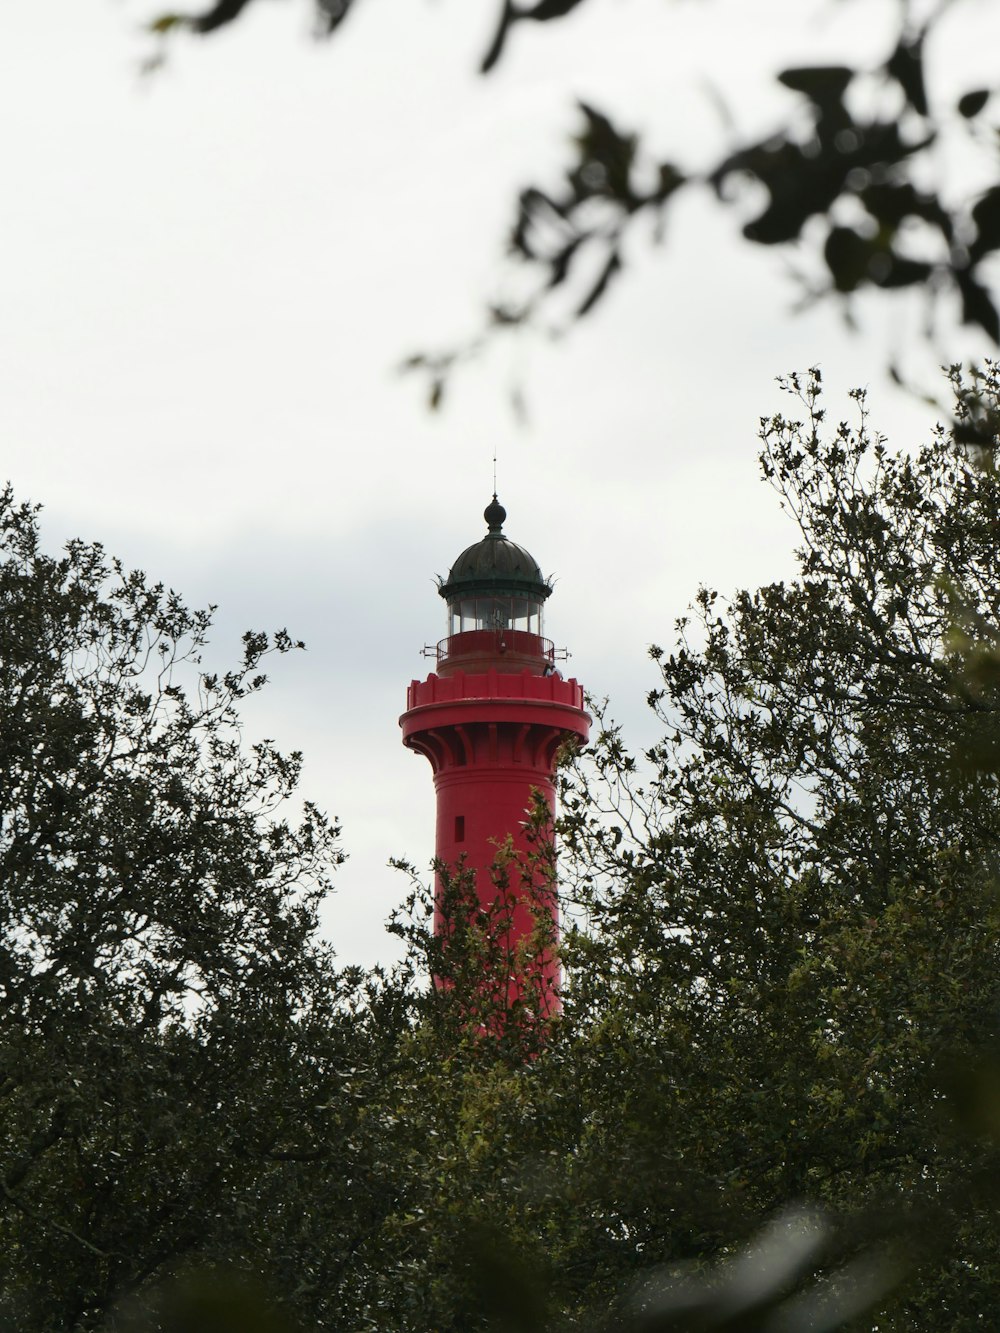 a red light house surrounded by trees on a cloudy day